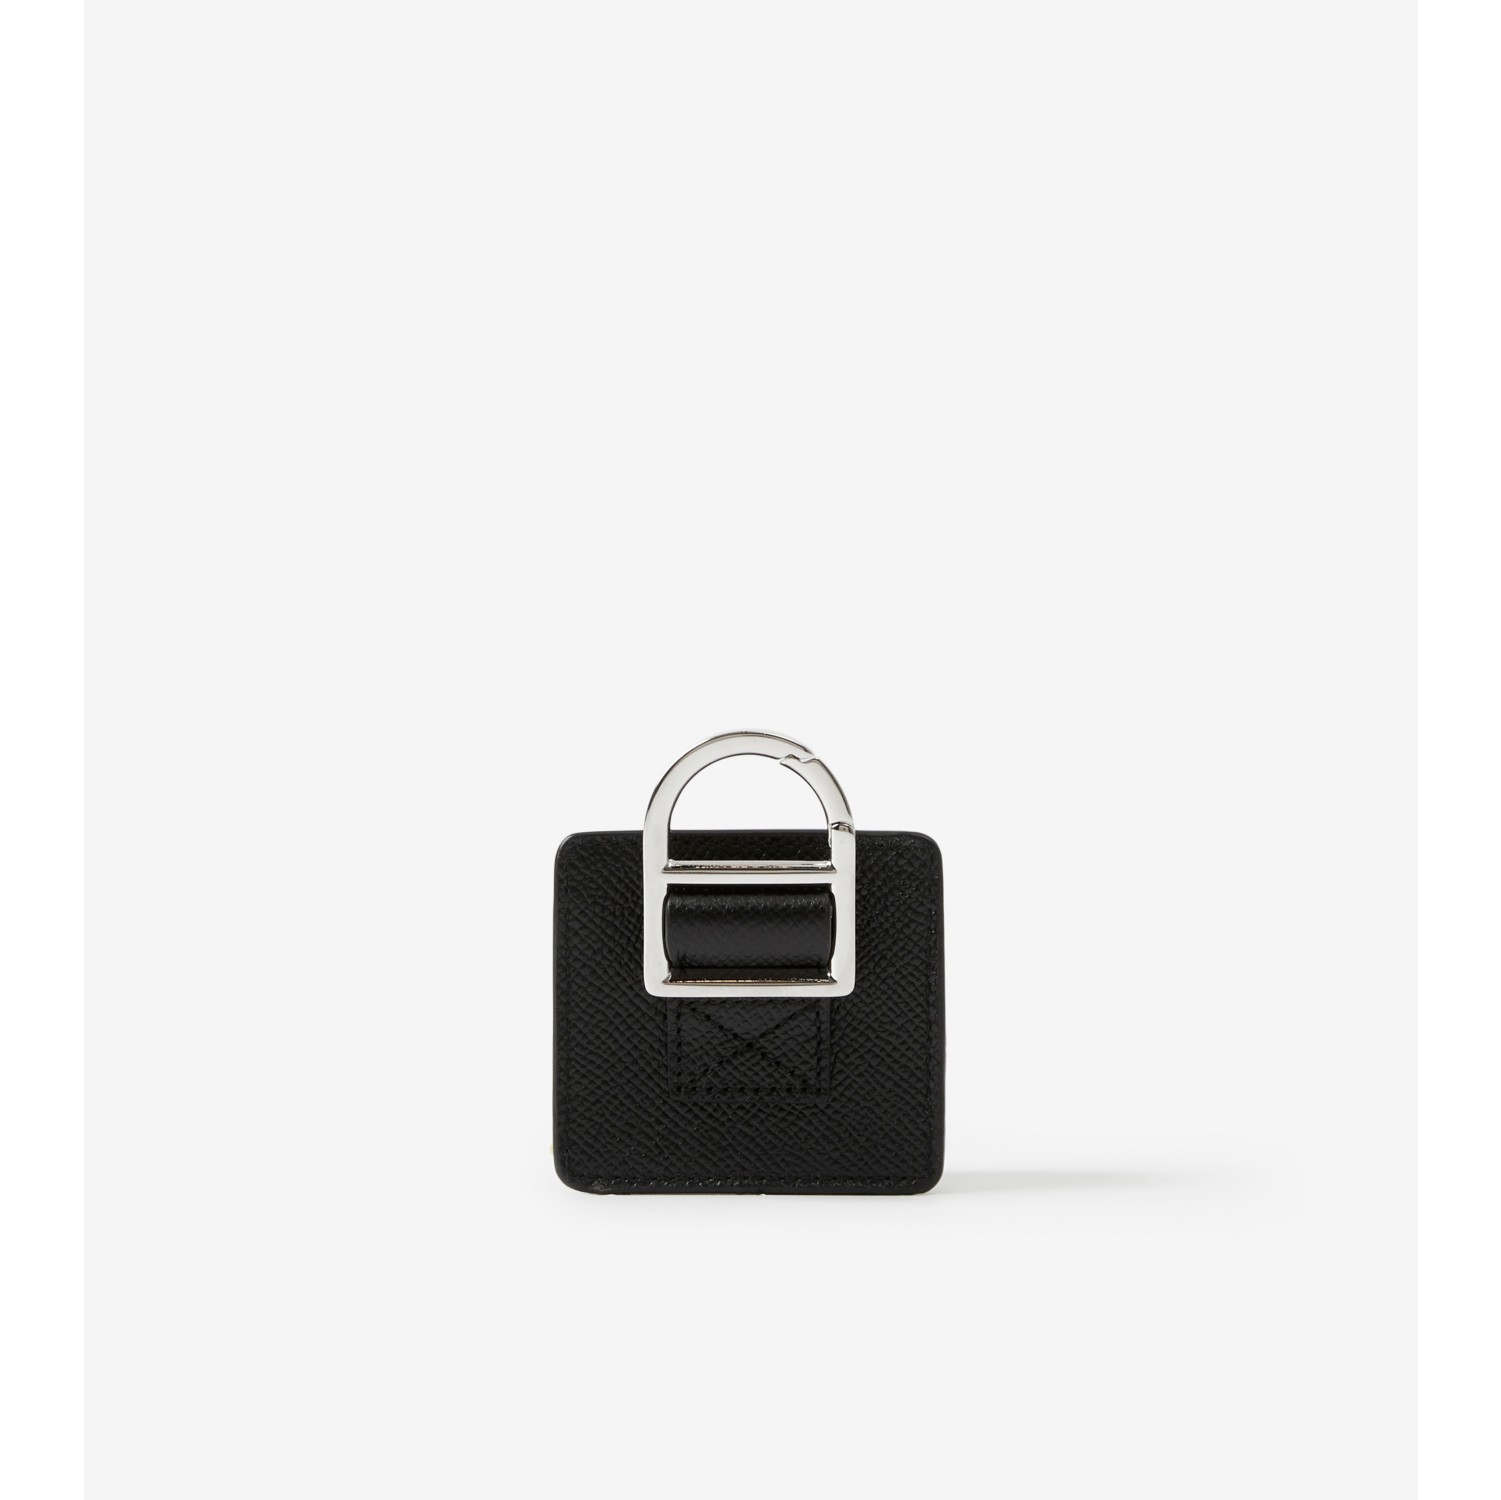 Dior Backpack AirPods Case